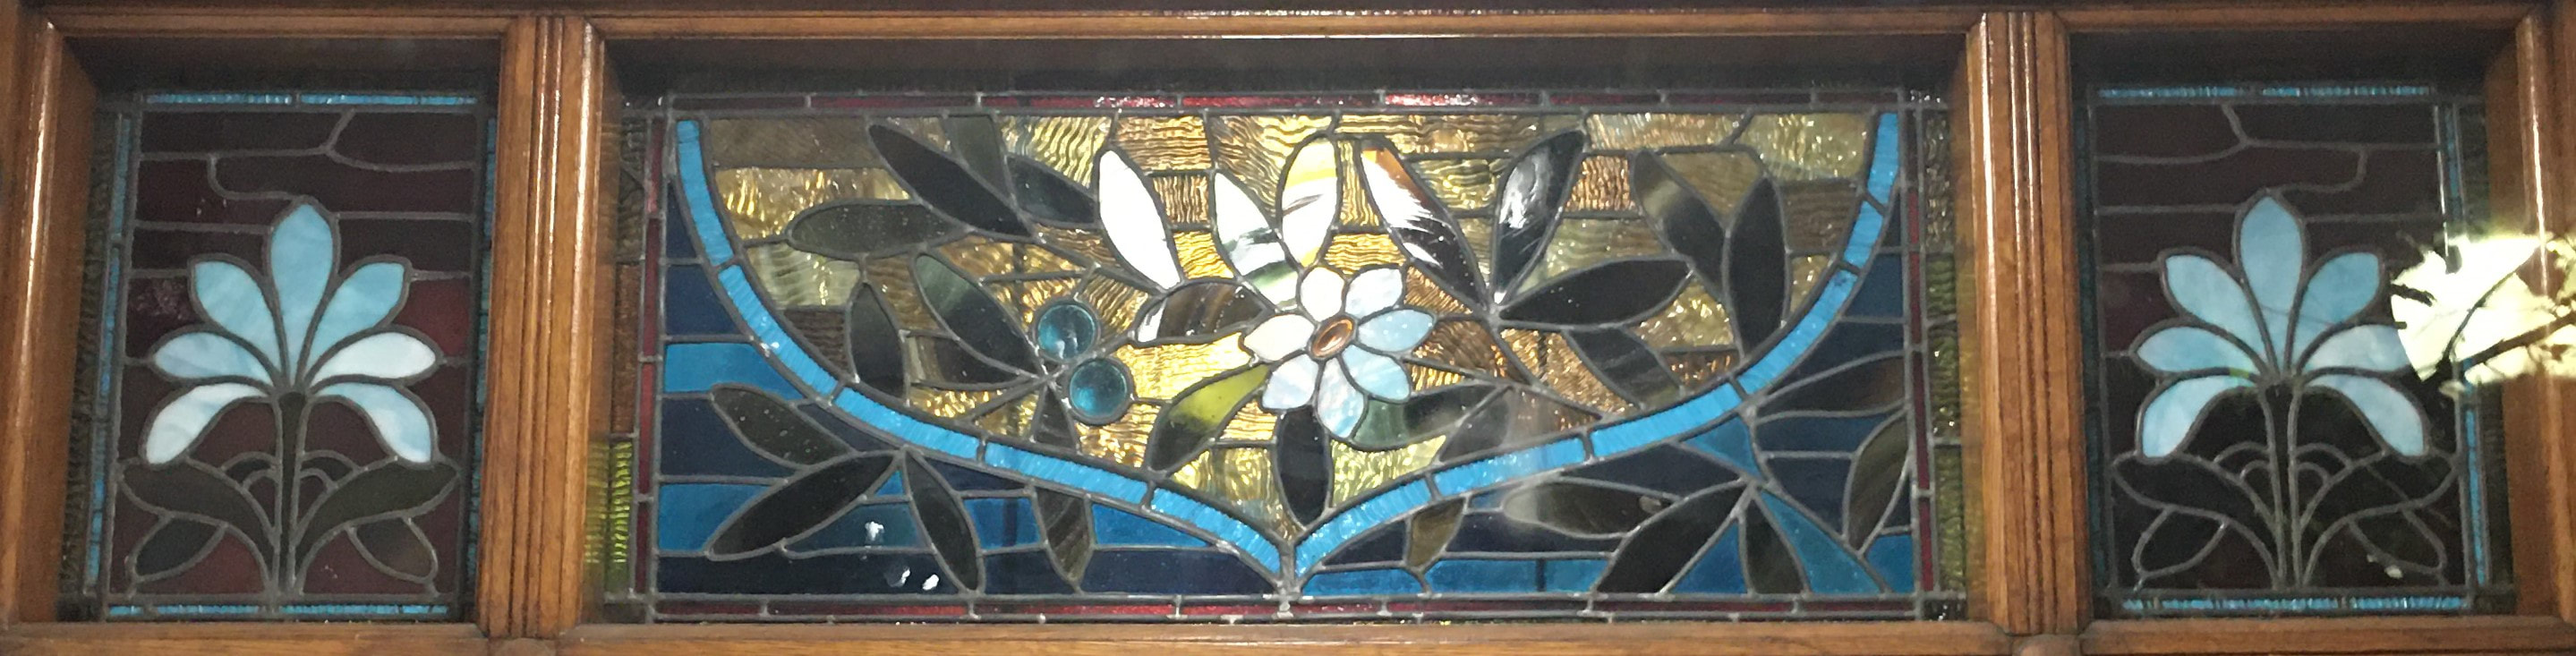 History of stained glass: Belcher Mosaic Co stained-glass windows from the  1880s.